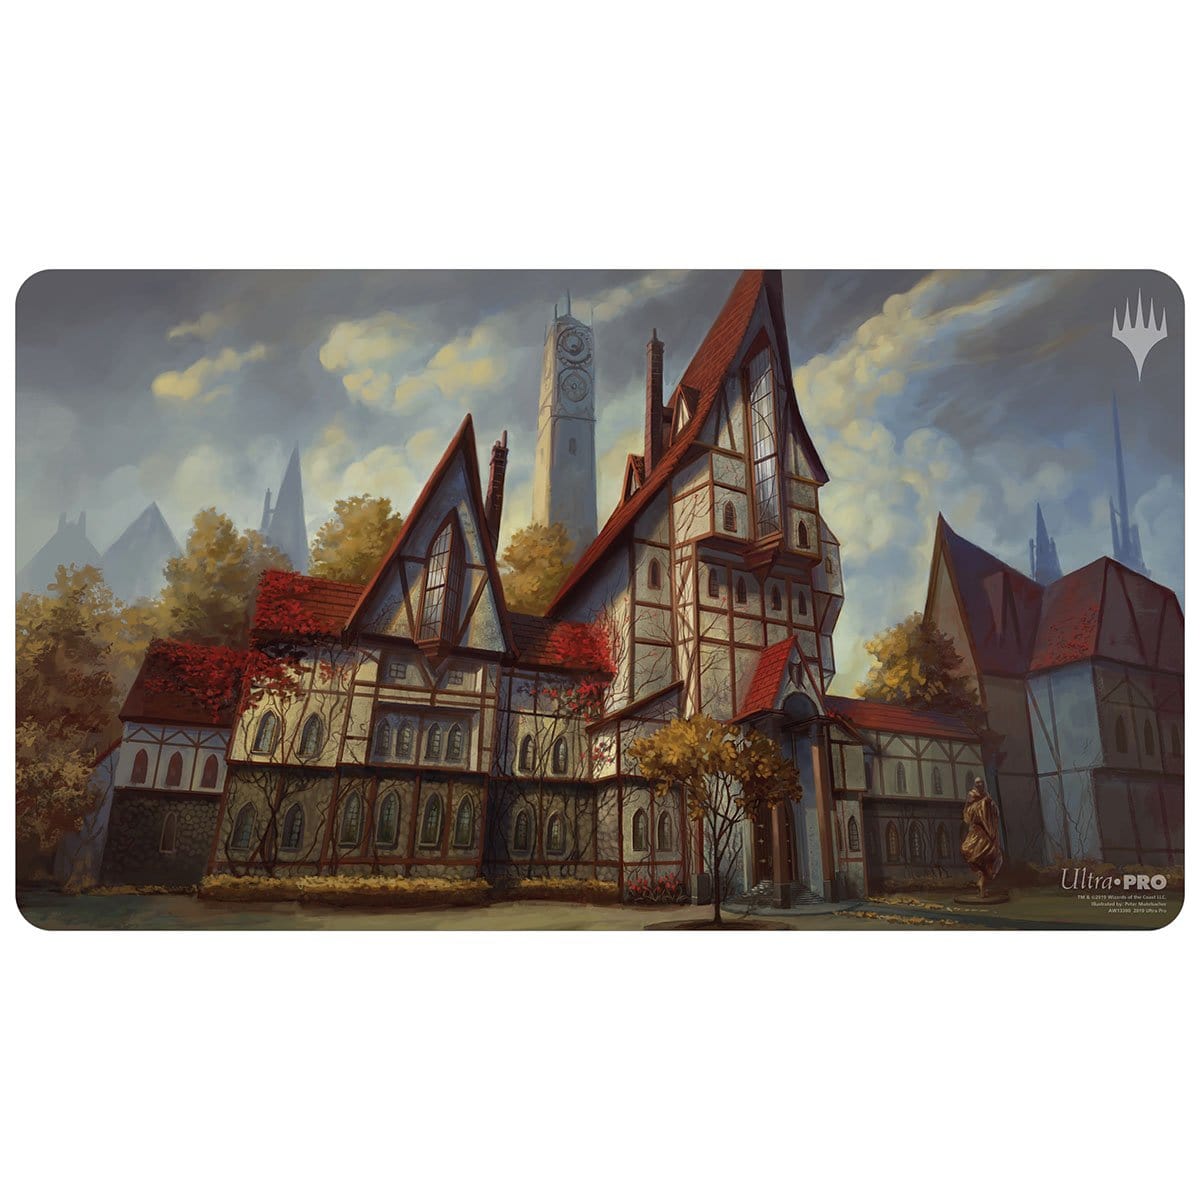 Gavony Township Playmat - Playmat - Original Magic Art - Accessories for Magic the Gathering and other card games